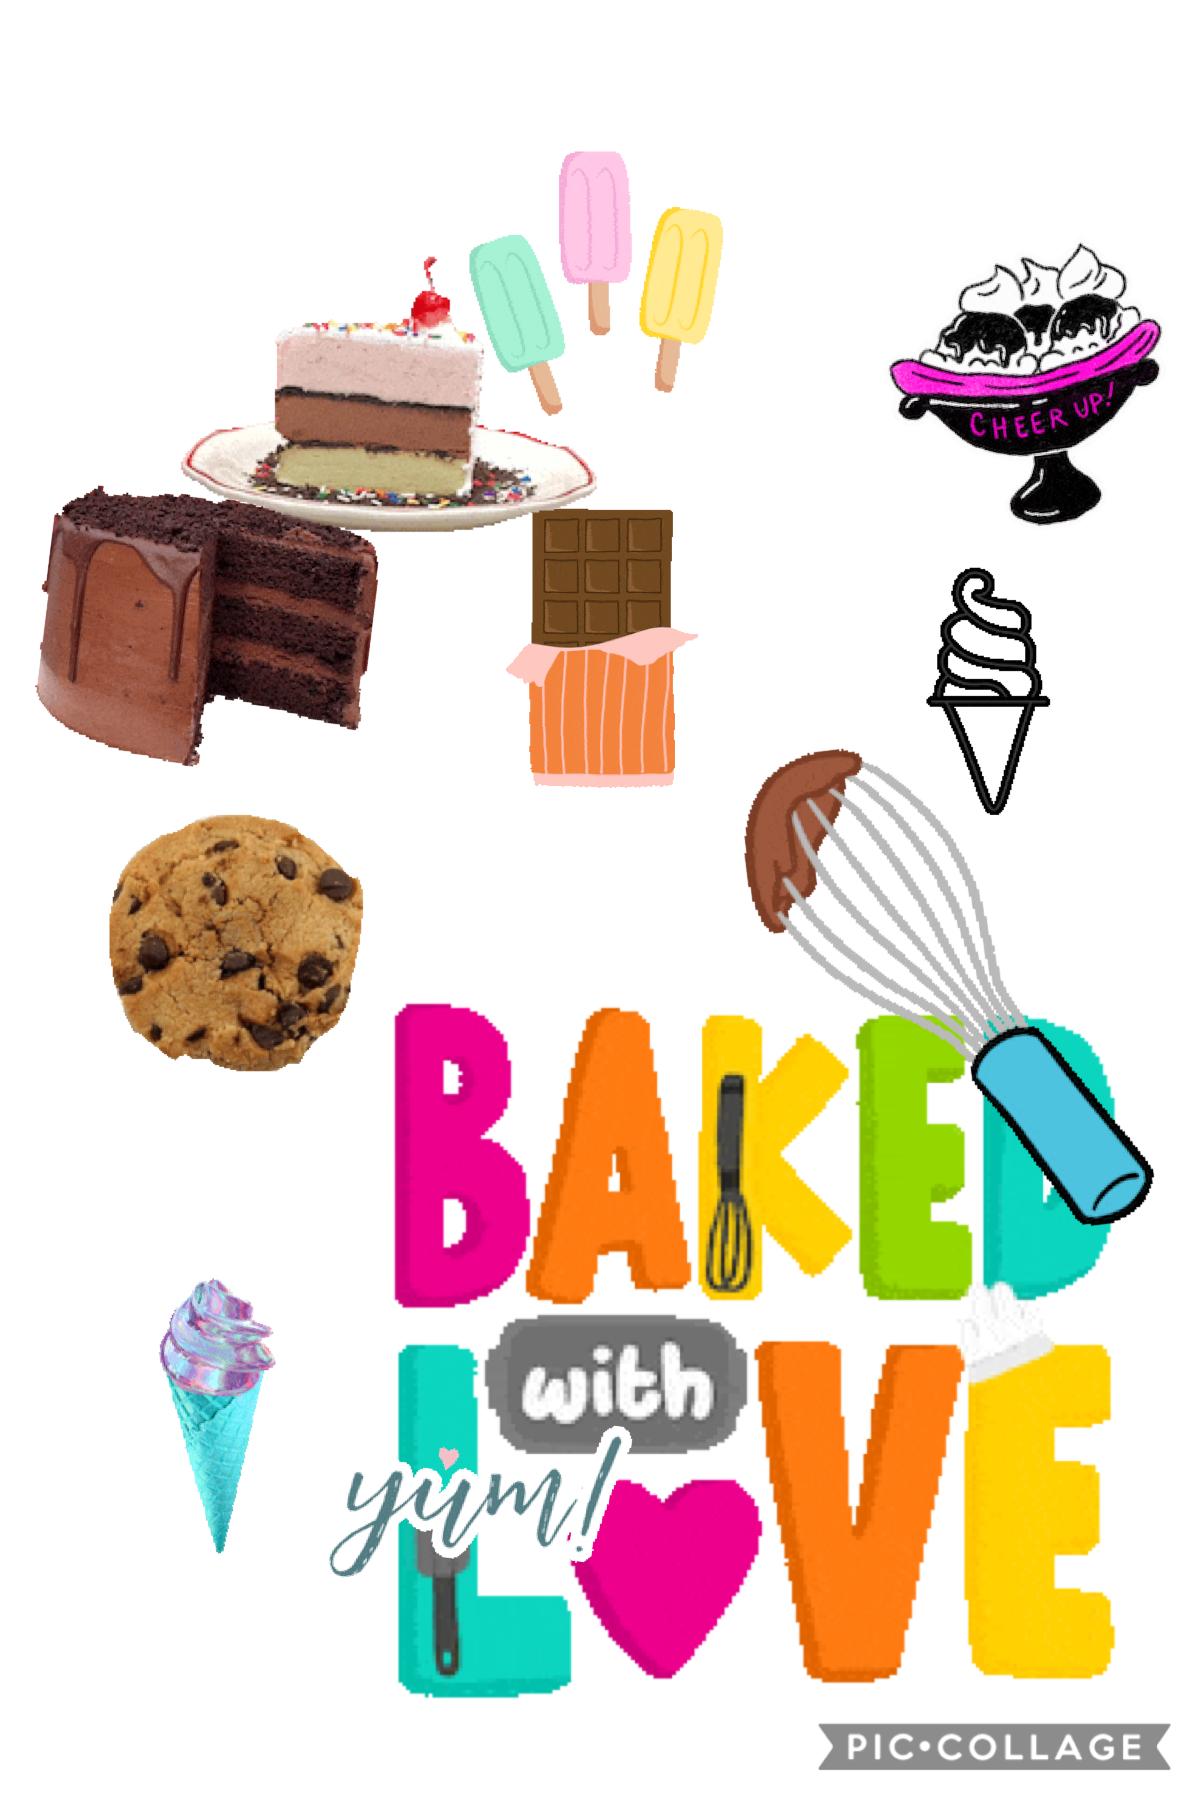 Especially in quarantine it is such a great time to bake #bakedwithlove